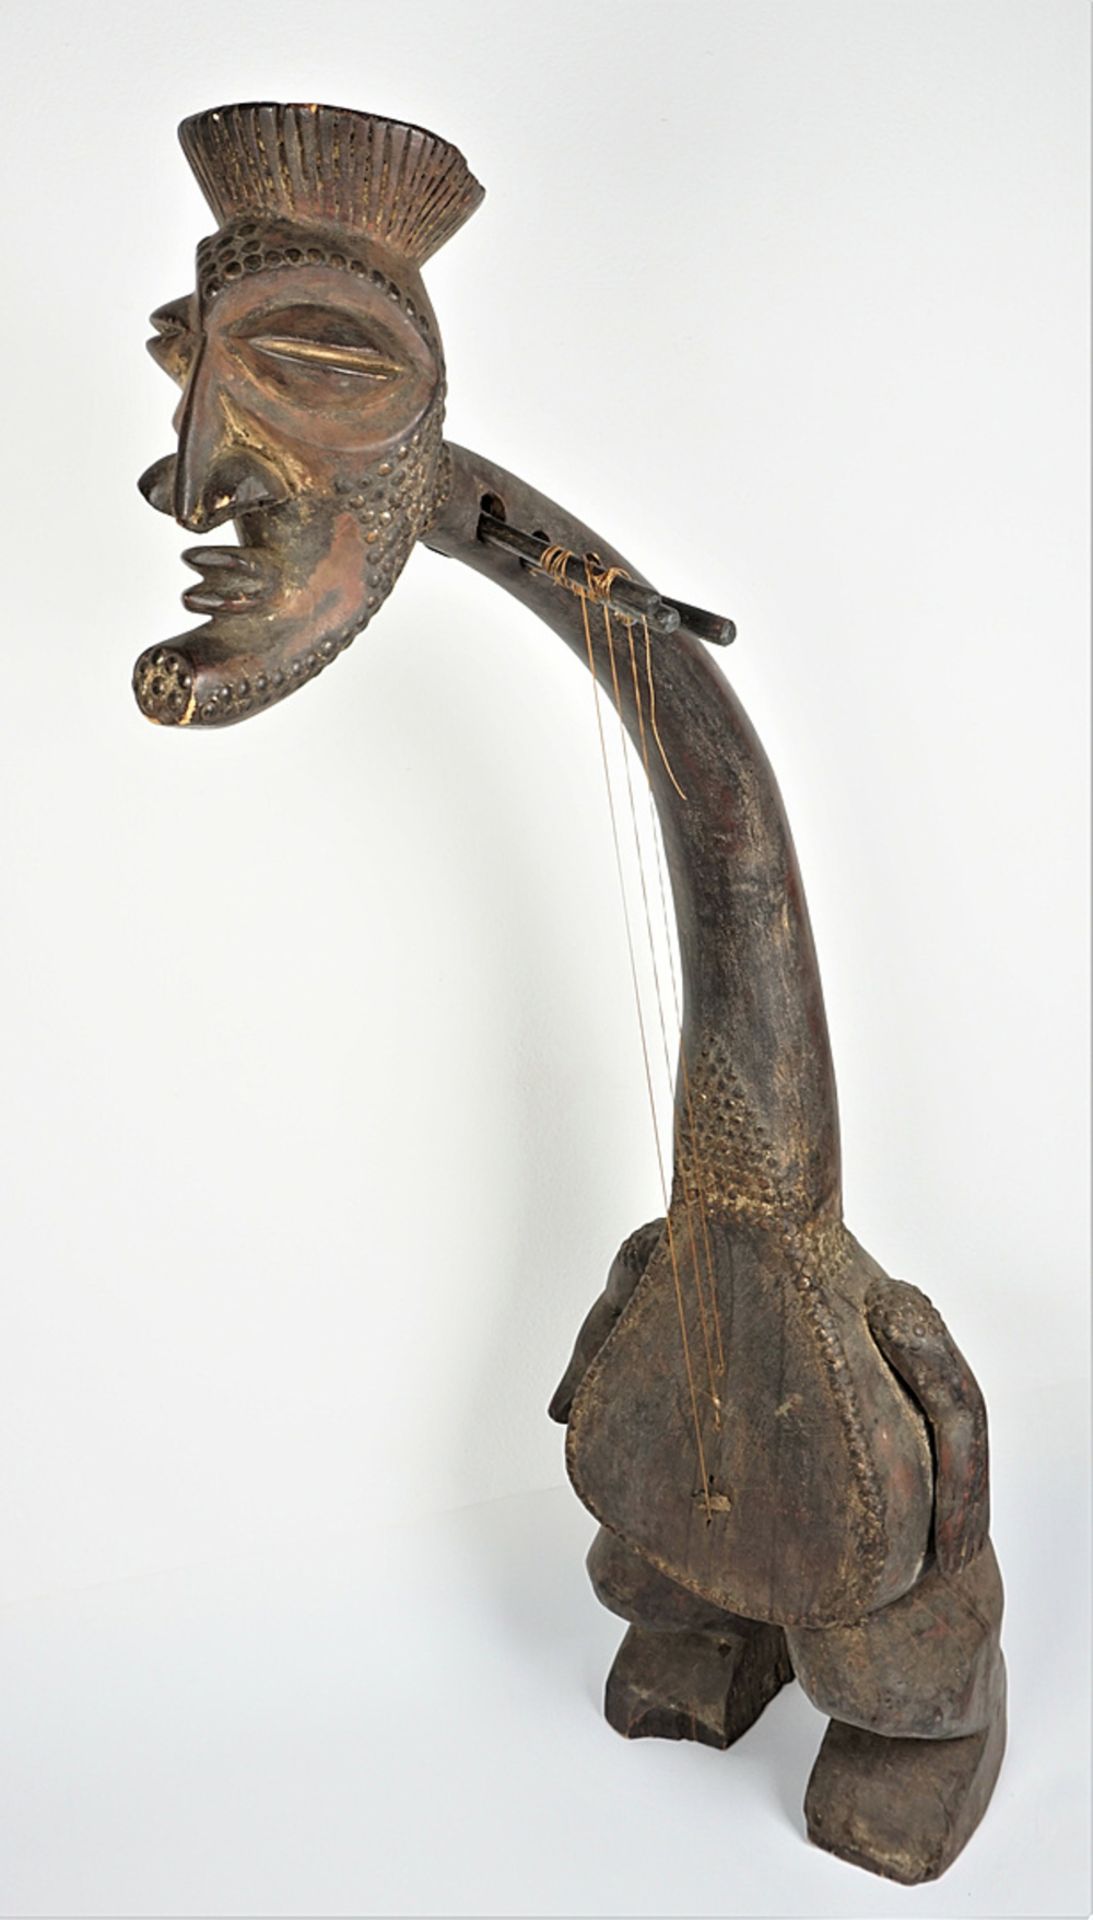 Figurative musical instrument similar to a kundi, DR Congo